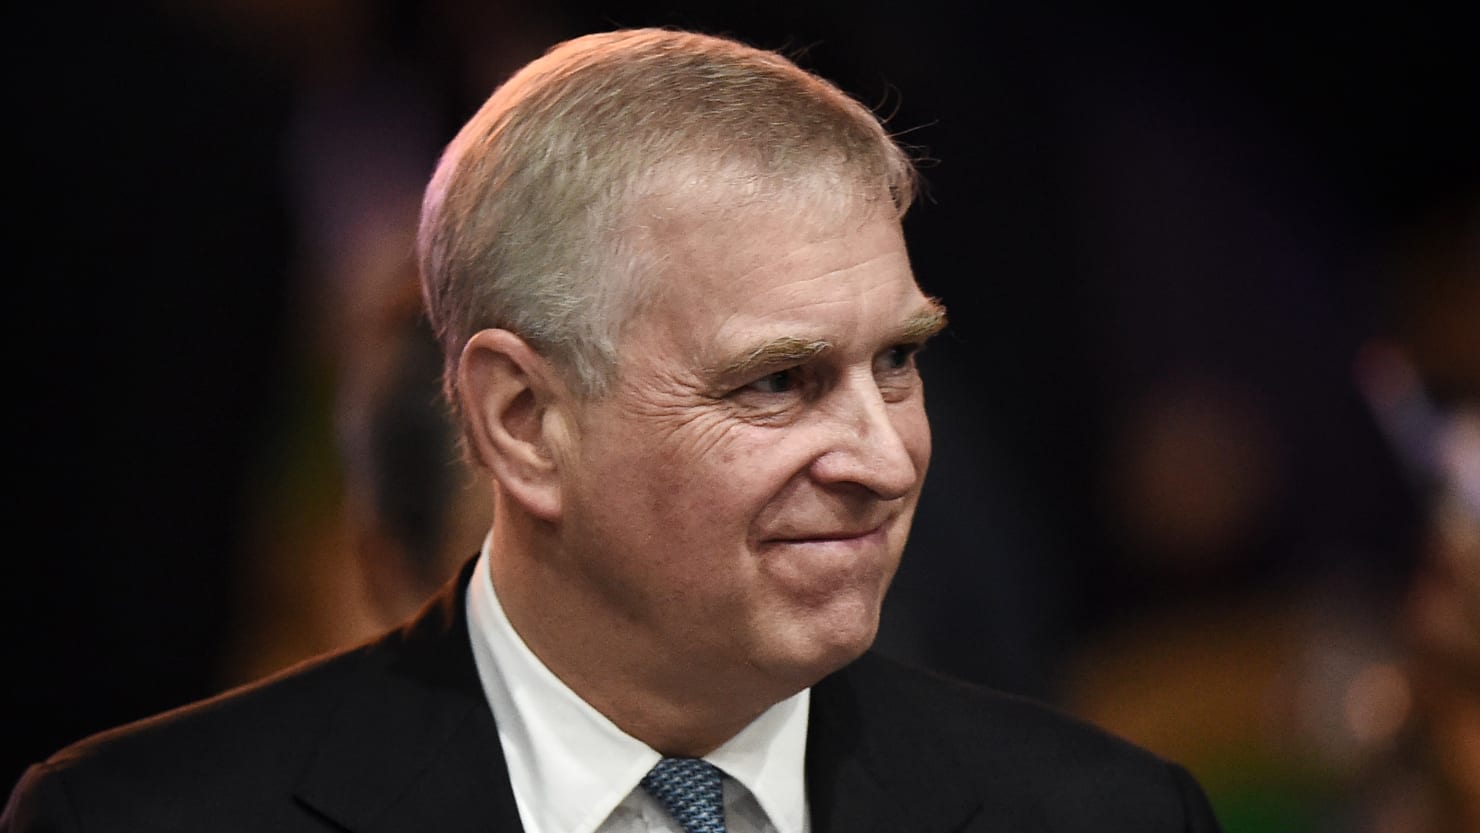 Prince Andrew Misled BBC When He Said He Did Not Stay at Jeffrey